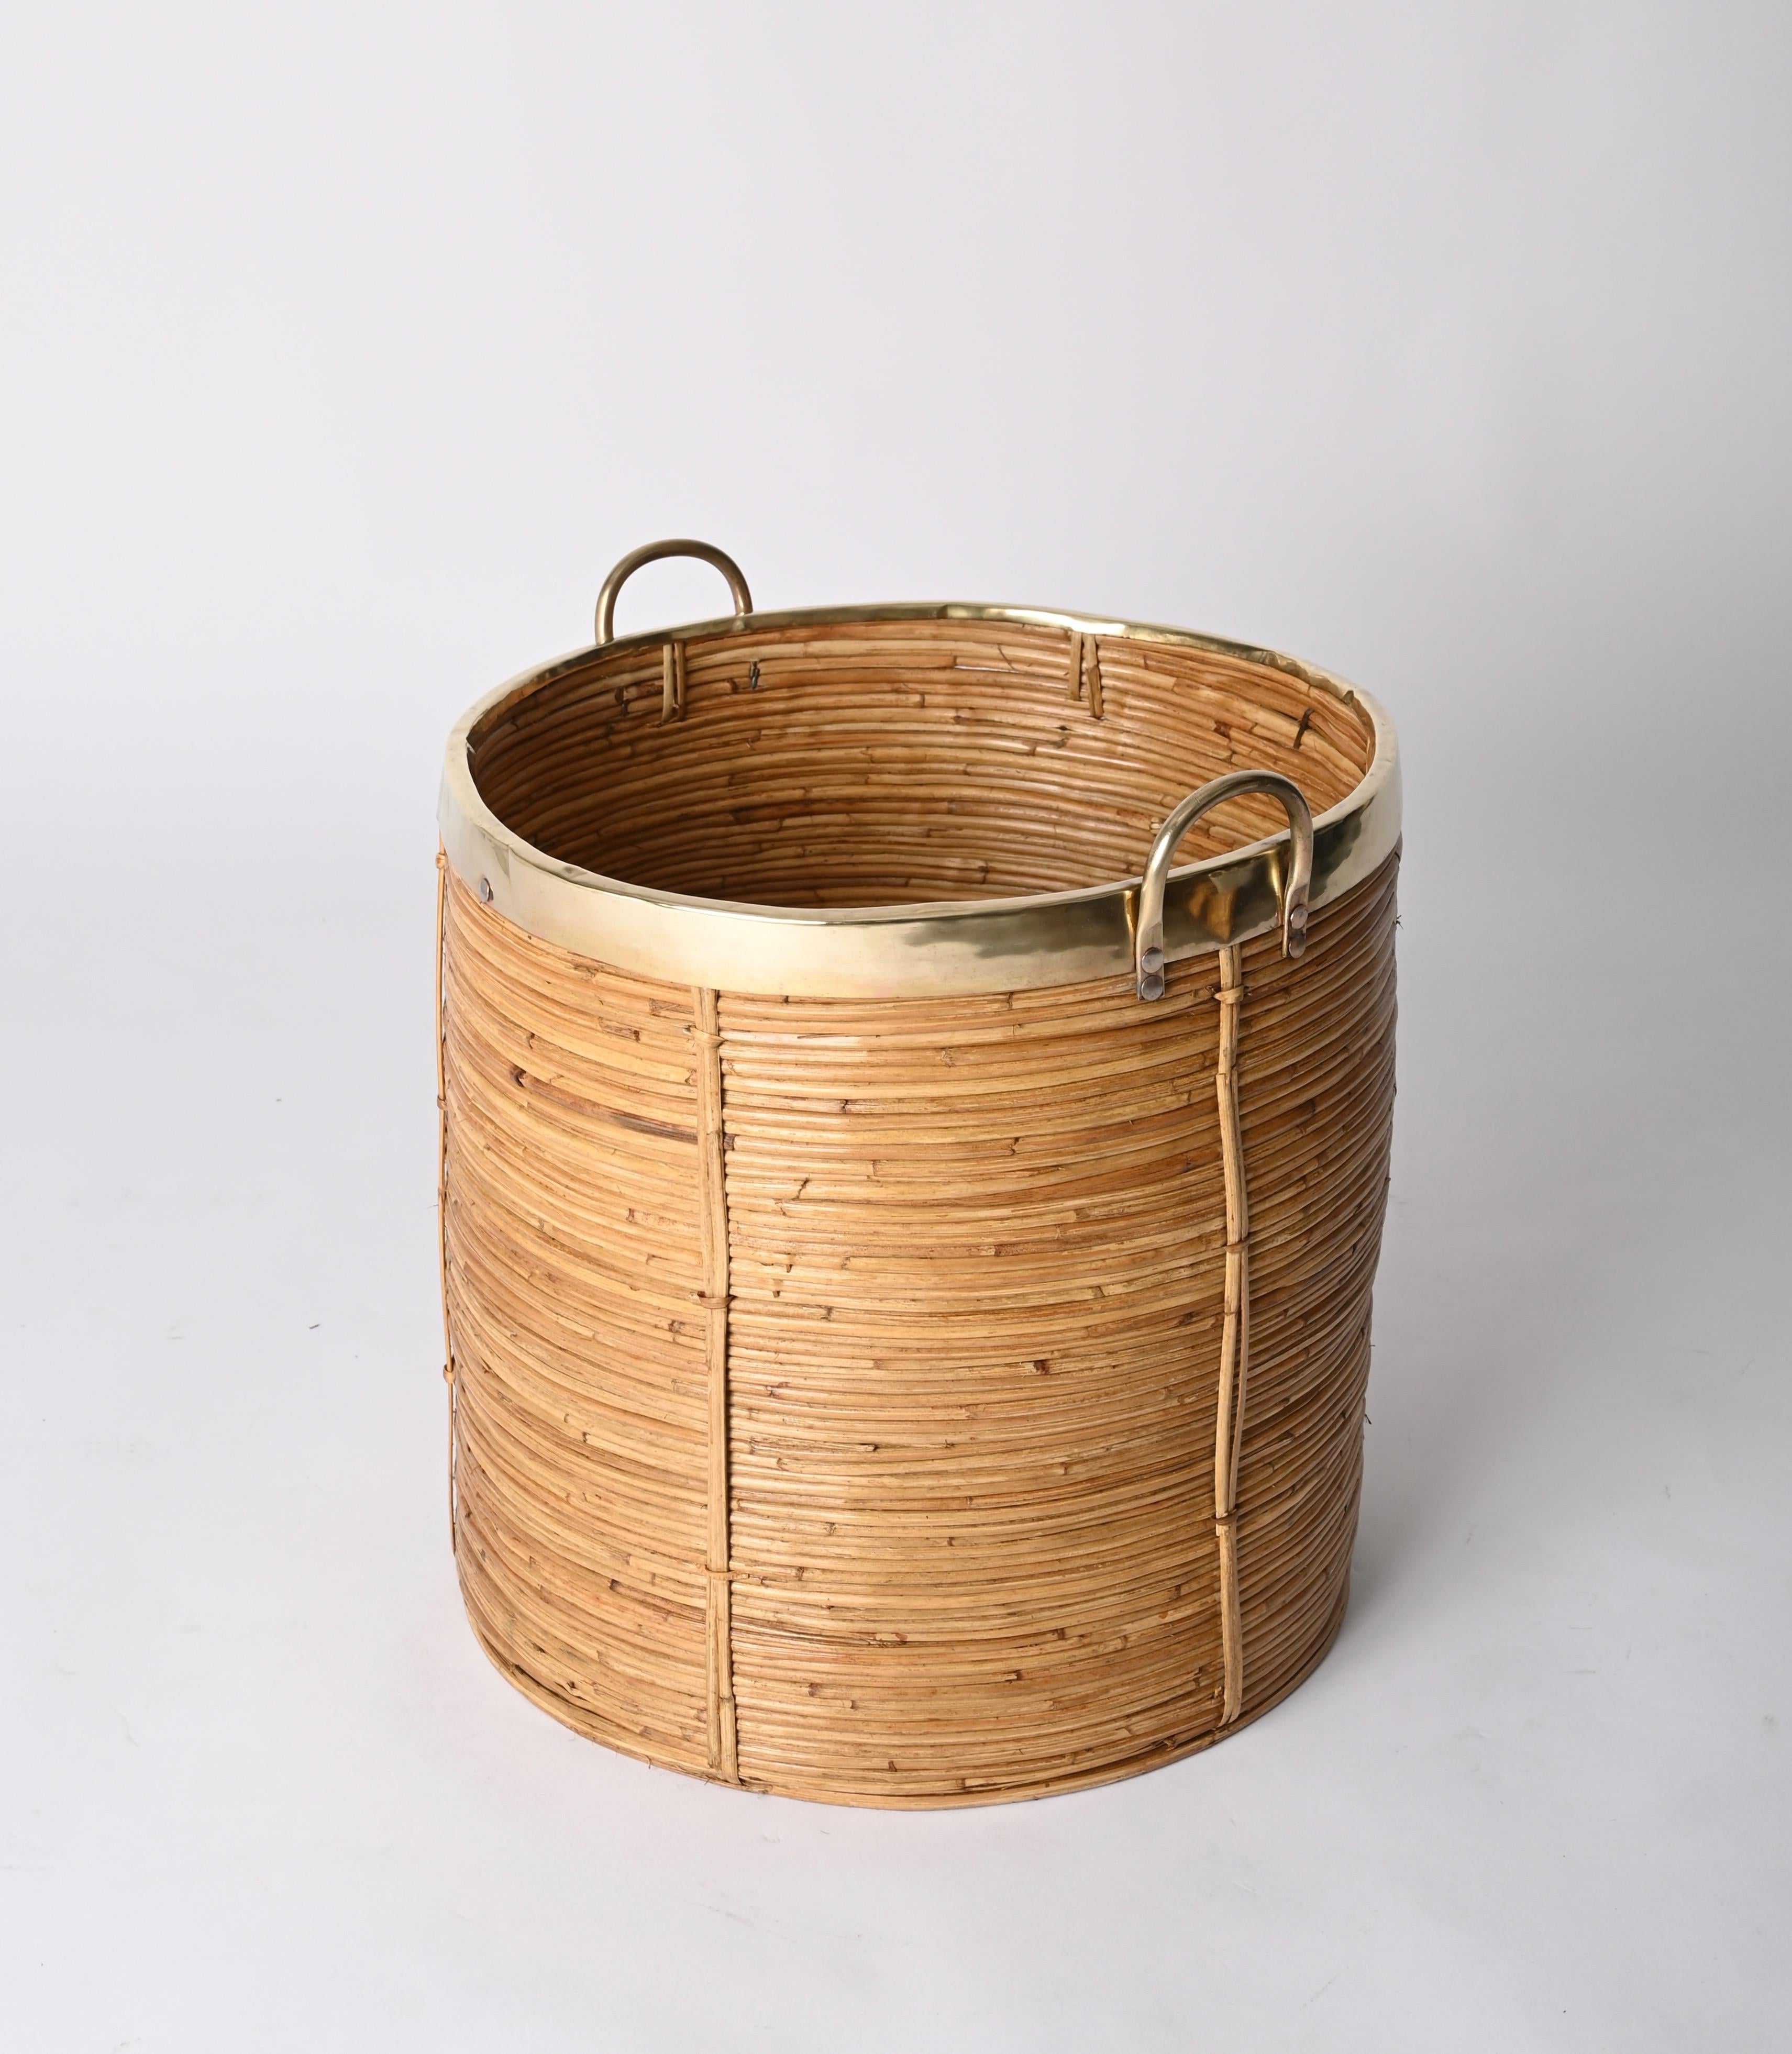 Gorgeous large decorative basket fully made in curved rattan, wicker and brass. This lovely object is attributed to Vivai del Sud and made in Italy during the 1970s. 

This stunning round decorative basket is fully made in curved rattan, decorated